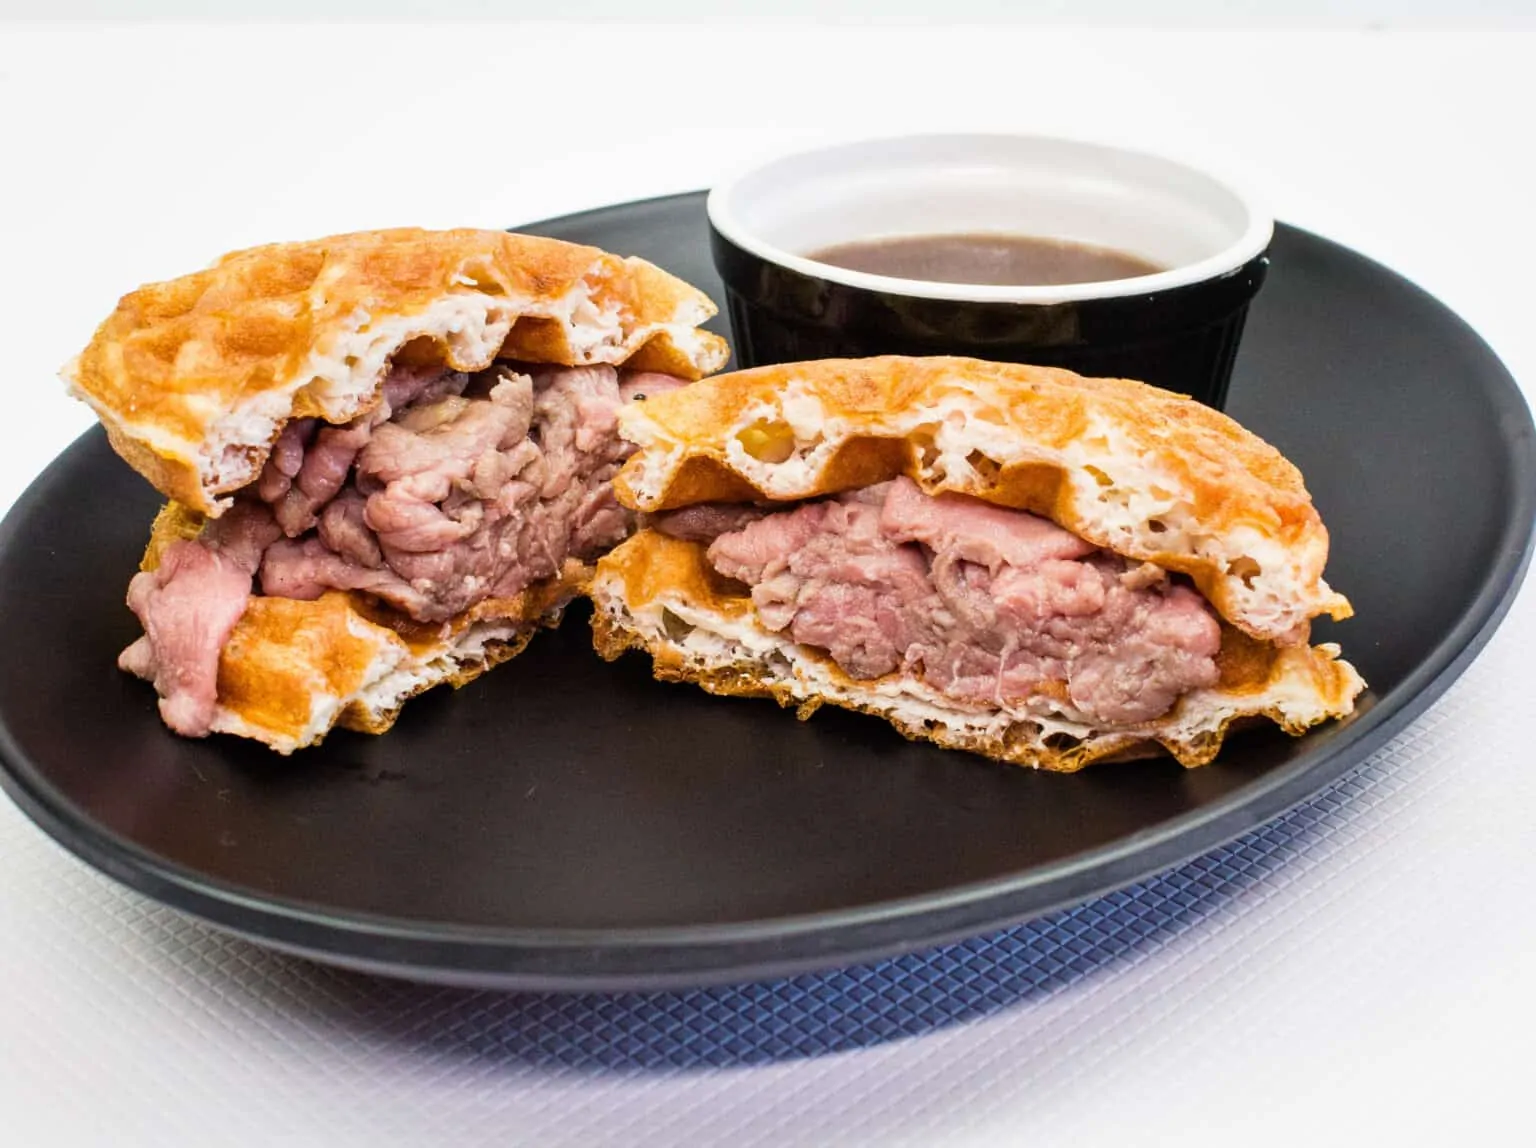 French Dip Chaffle Sandwich on a plate.